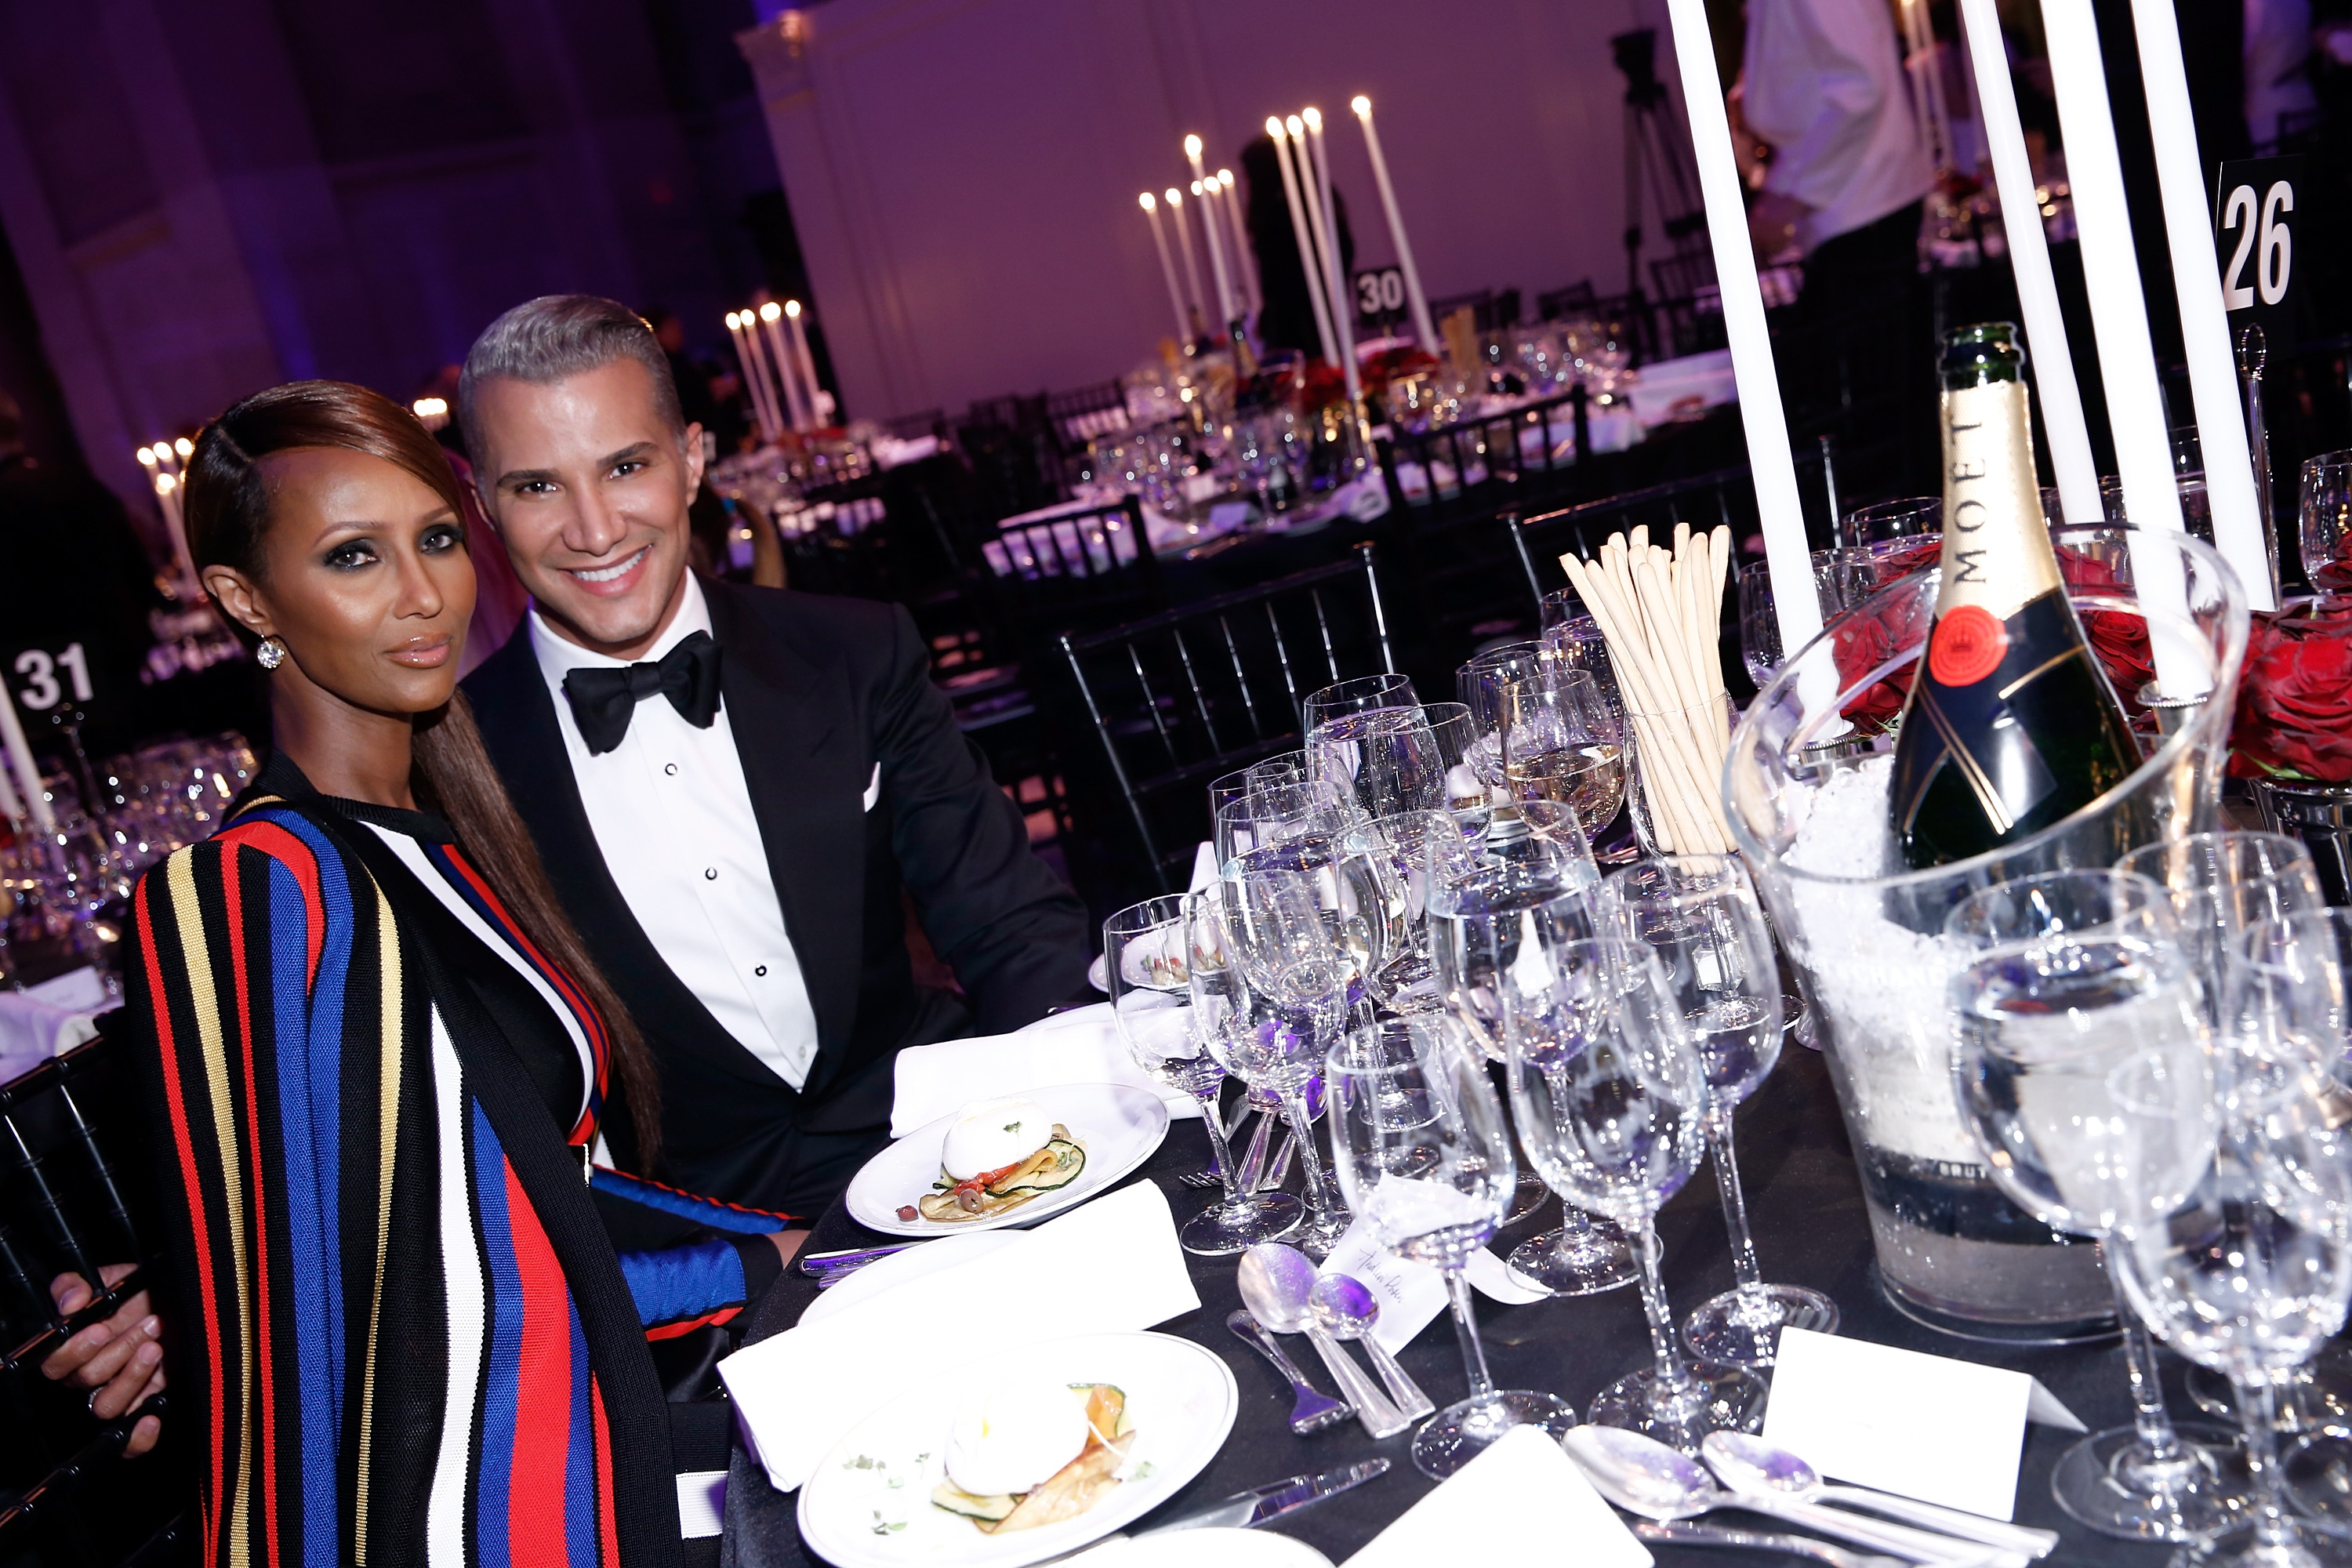 Model Iman Abdulmajid (L) and make up artist Jay Manuel attend the Moet & Chandon toast to the amfAR Gala at Cipriani Wall Street